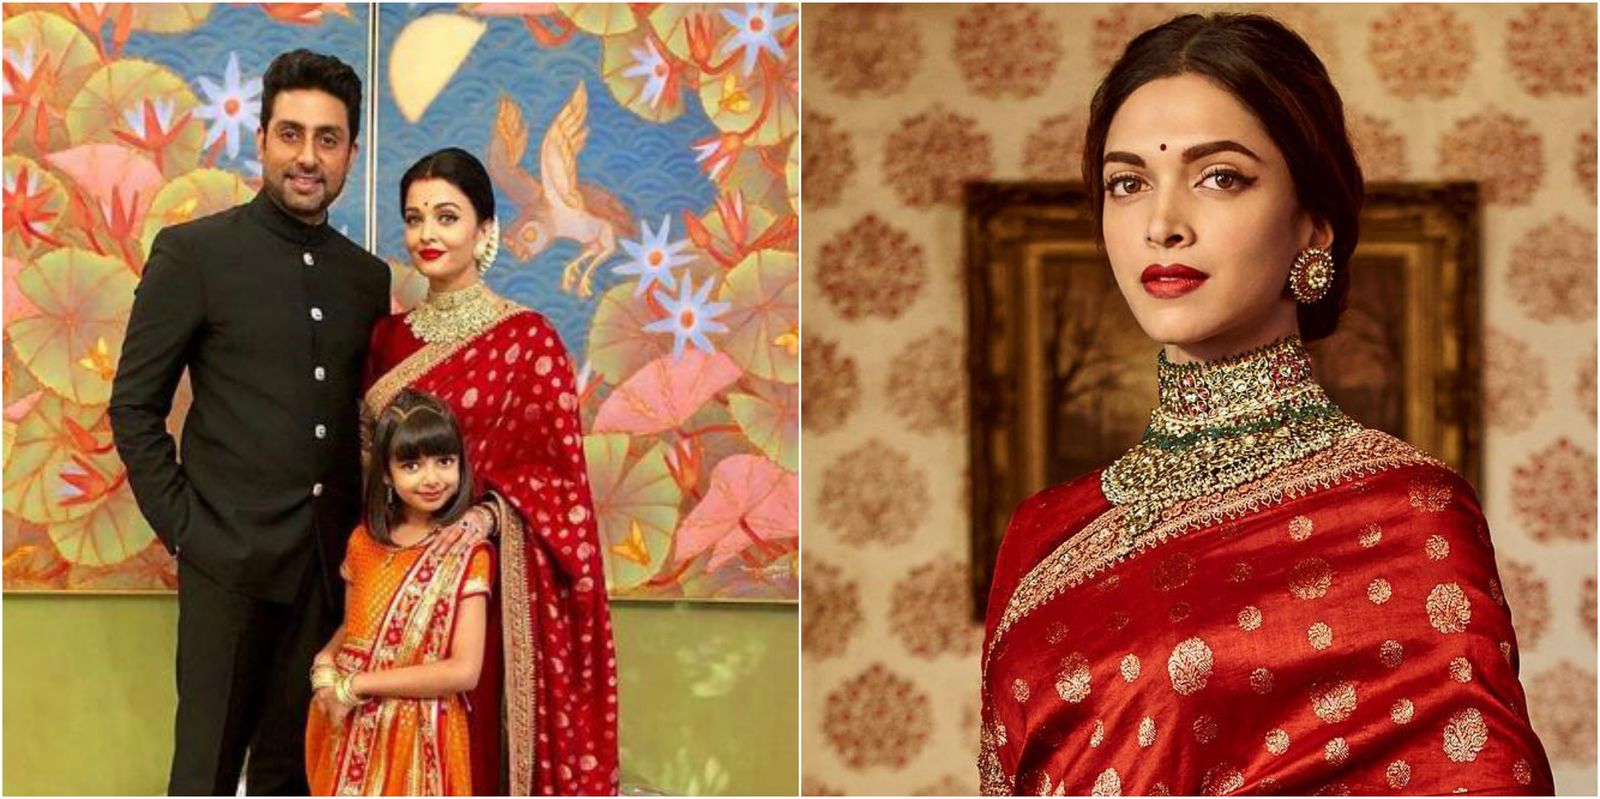 Aishwarya Rai Bachchan Just Copied An Entire Look From Deepika Padukone Down To The Last Details